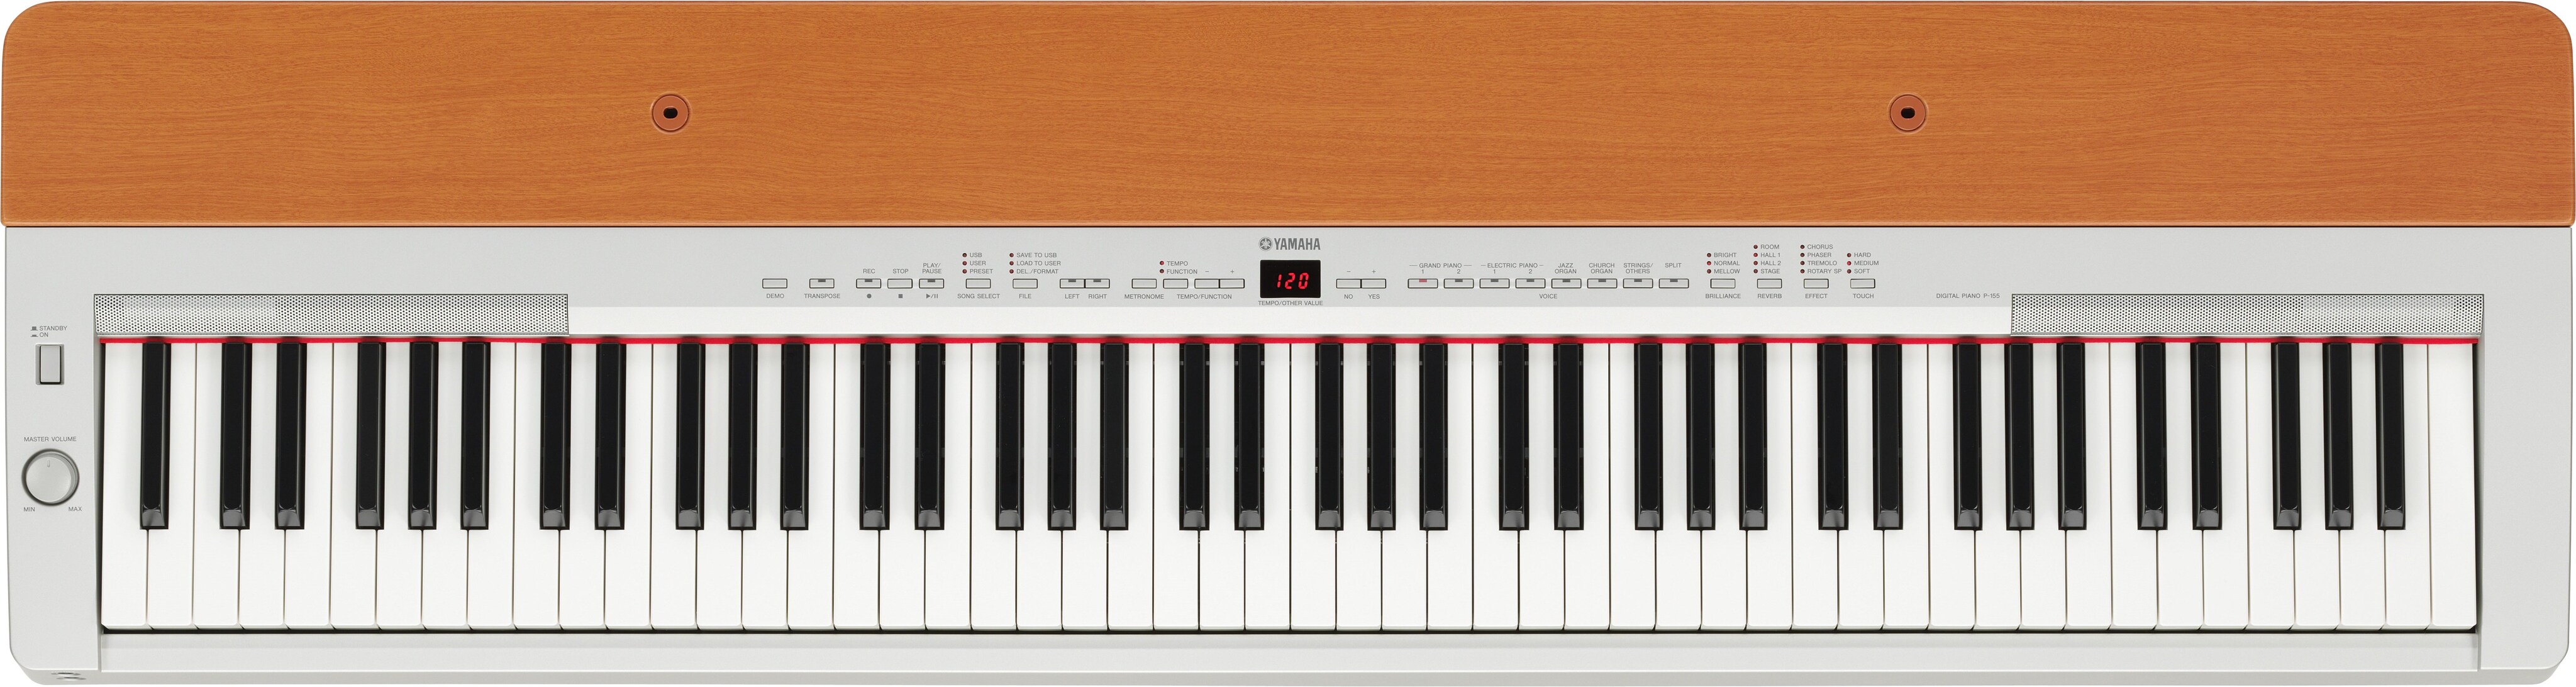 P-155 - Overview - P Series - Pianos - Musical Instruments 